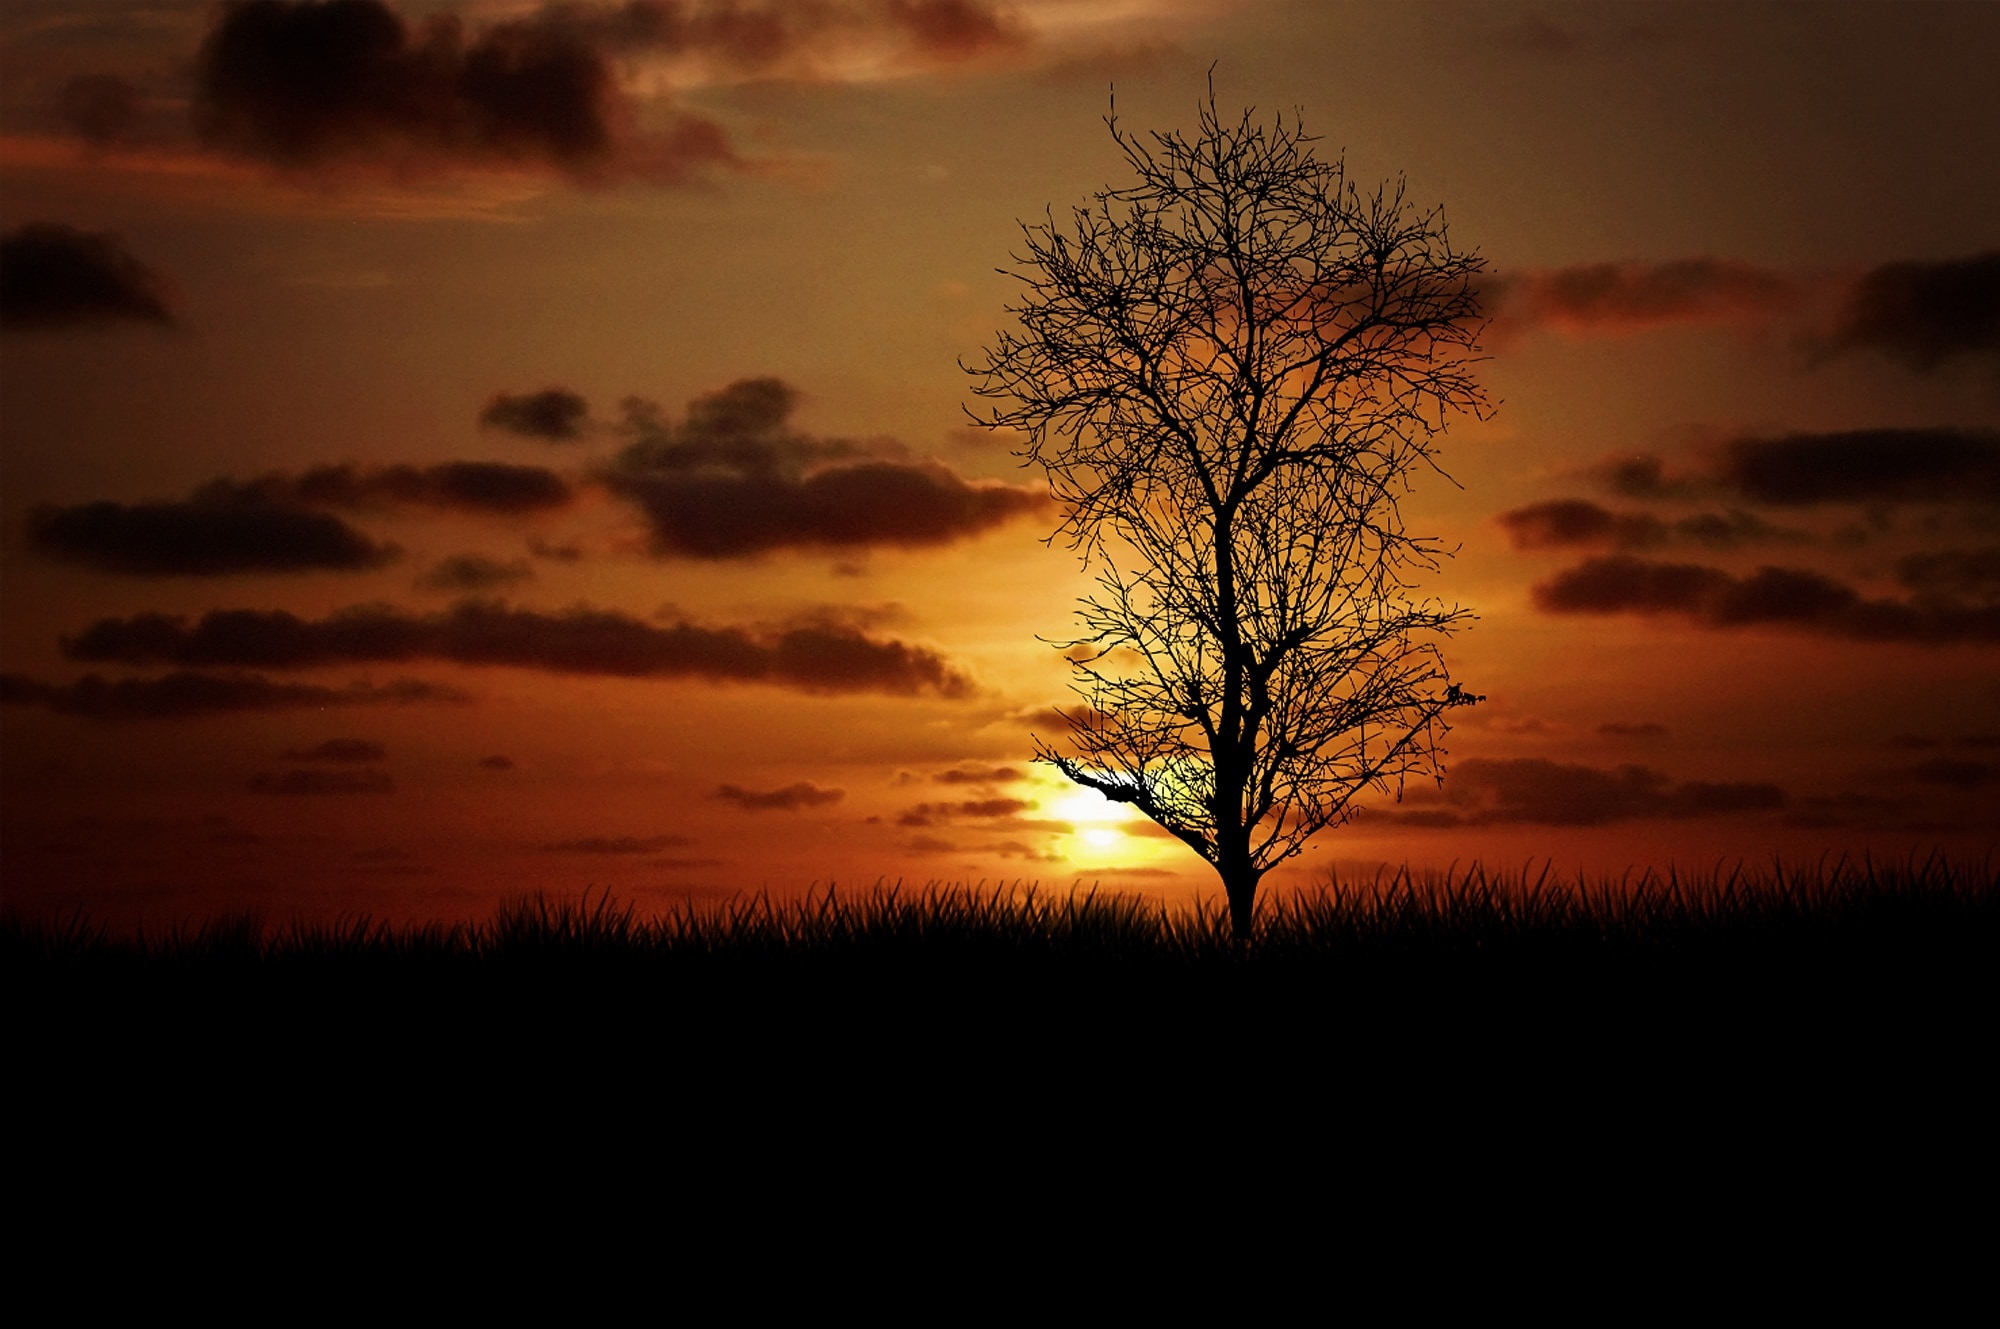 1600x1200 wallpaper | silhouette of tree during sunset | Peakpx